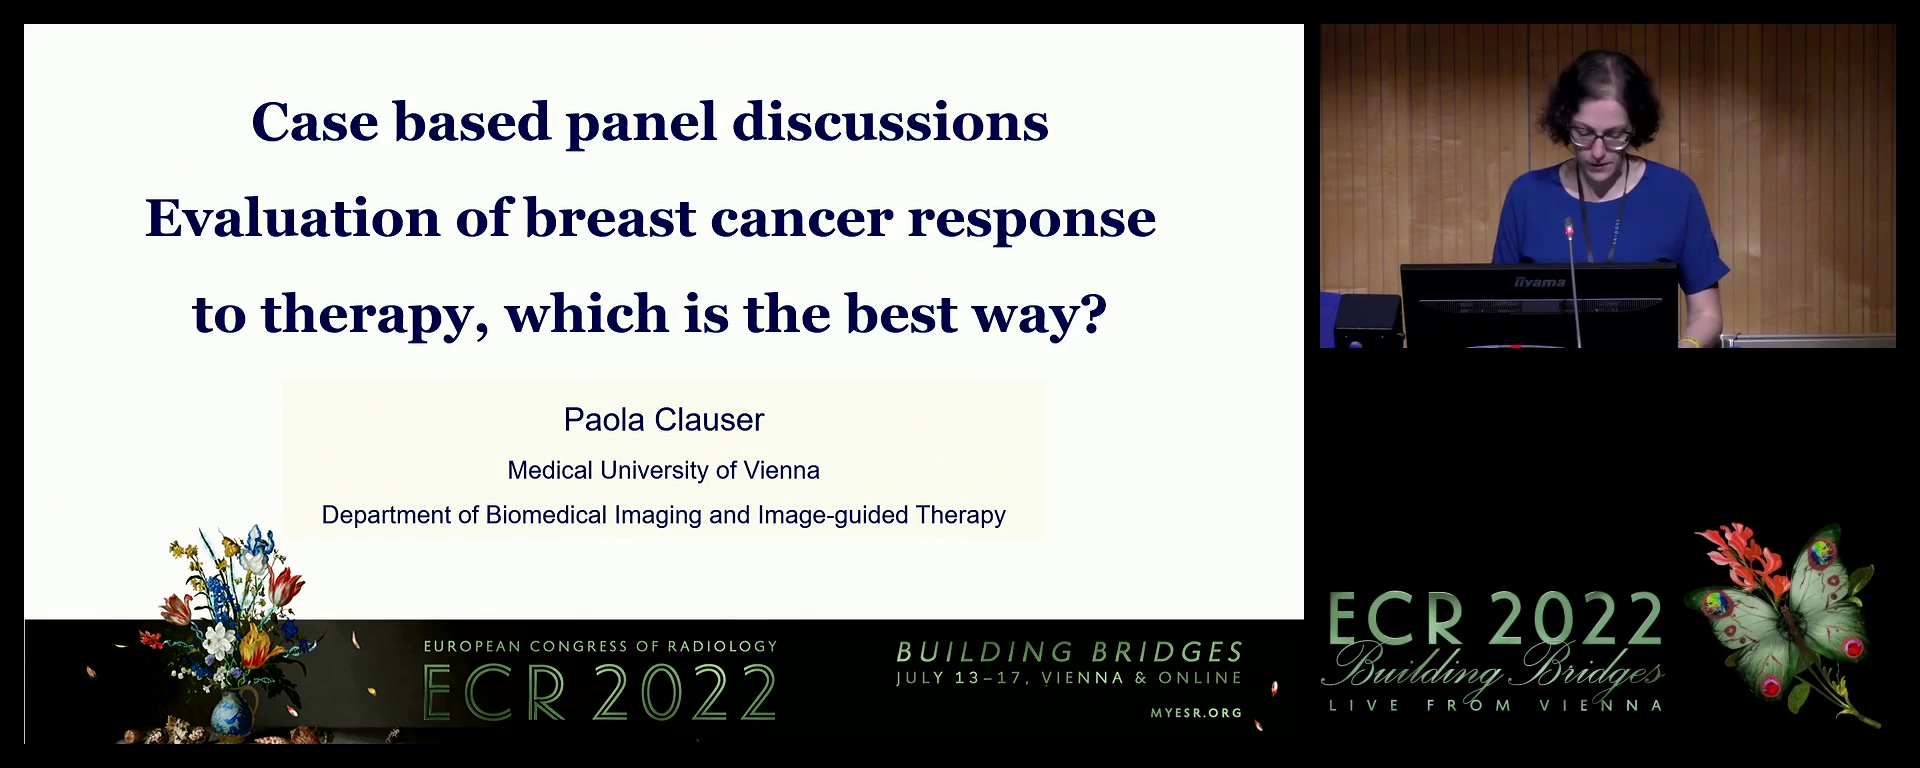 Case based panel discussions: evaluation of breast cancer response
to therapy, which is the best way?